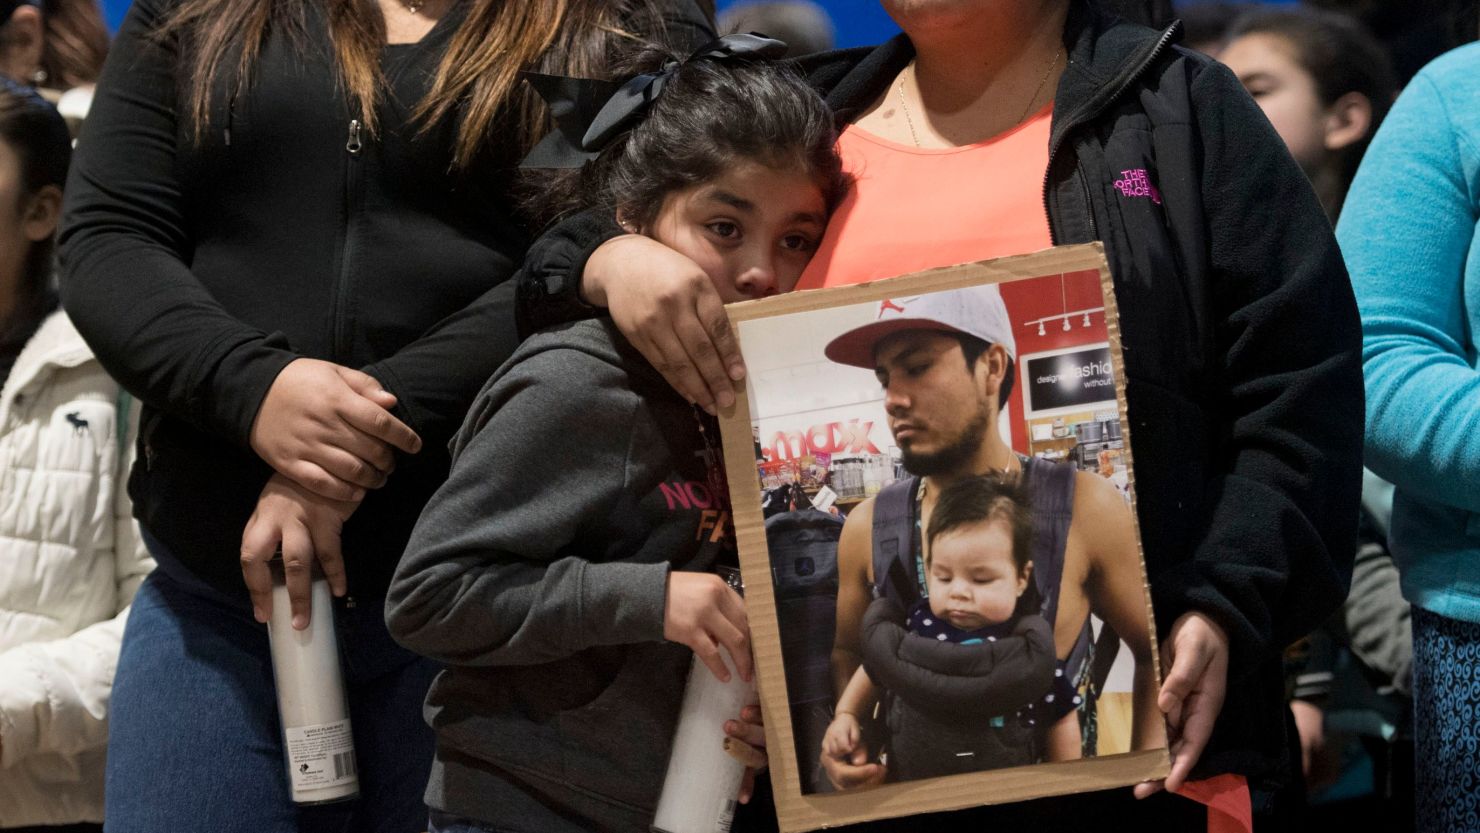 Esmeralda Bautista stands at a vigil last year with a photograph of her brother Luis Bautista-Martinez, one of the workers detained when ICE raided a Tennessee meatpacking plant.